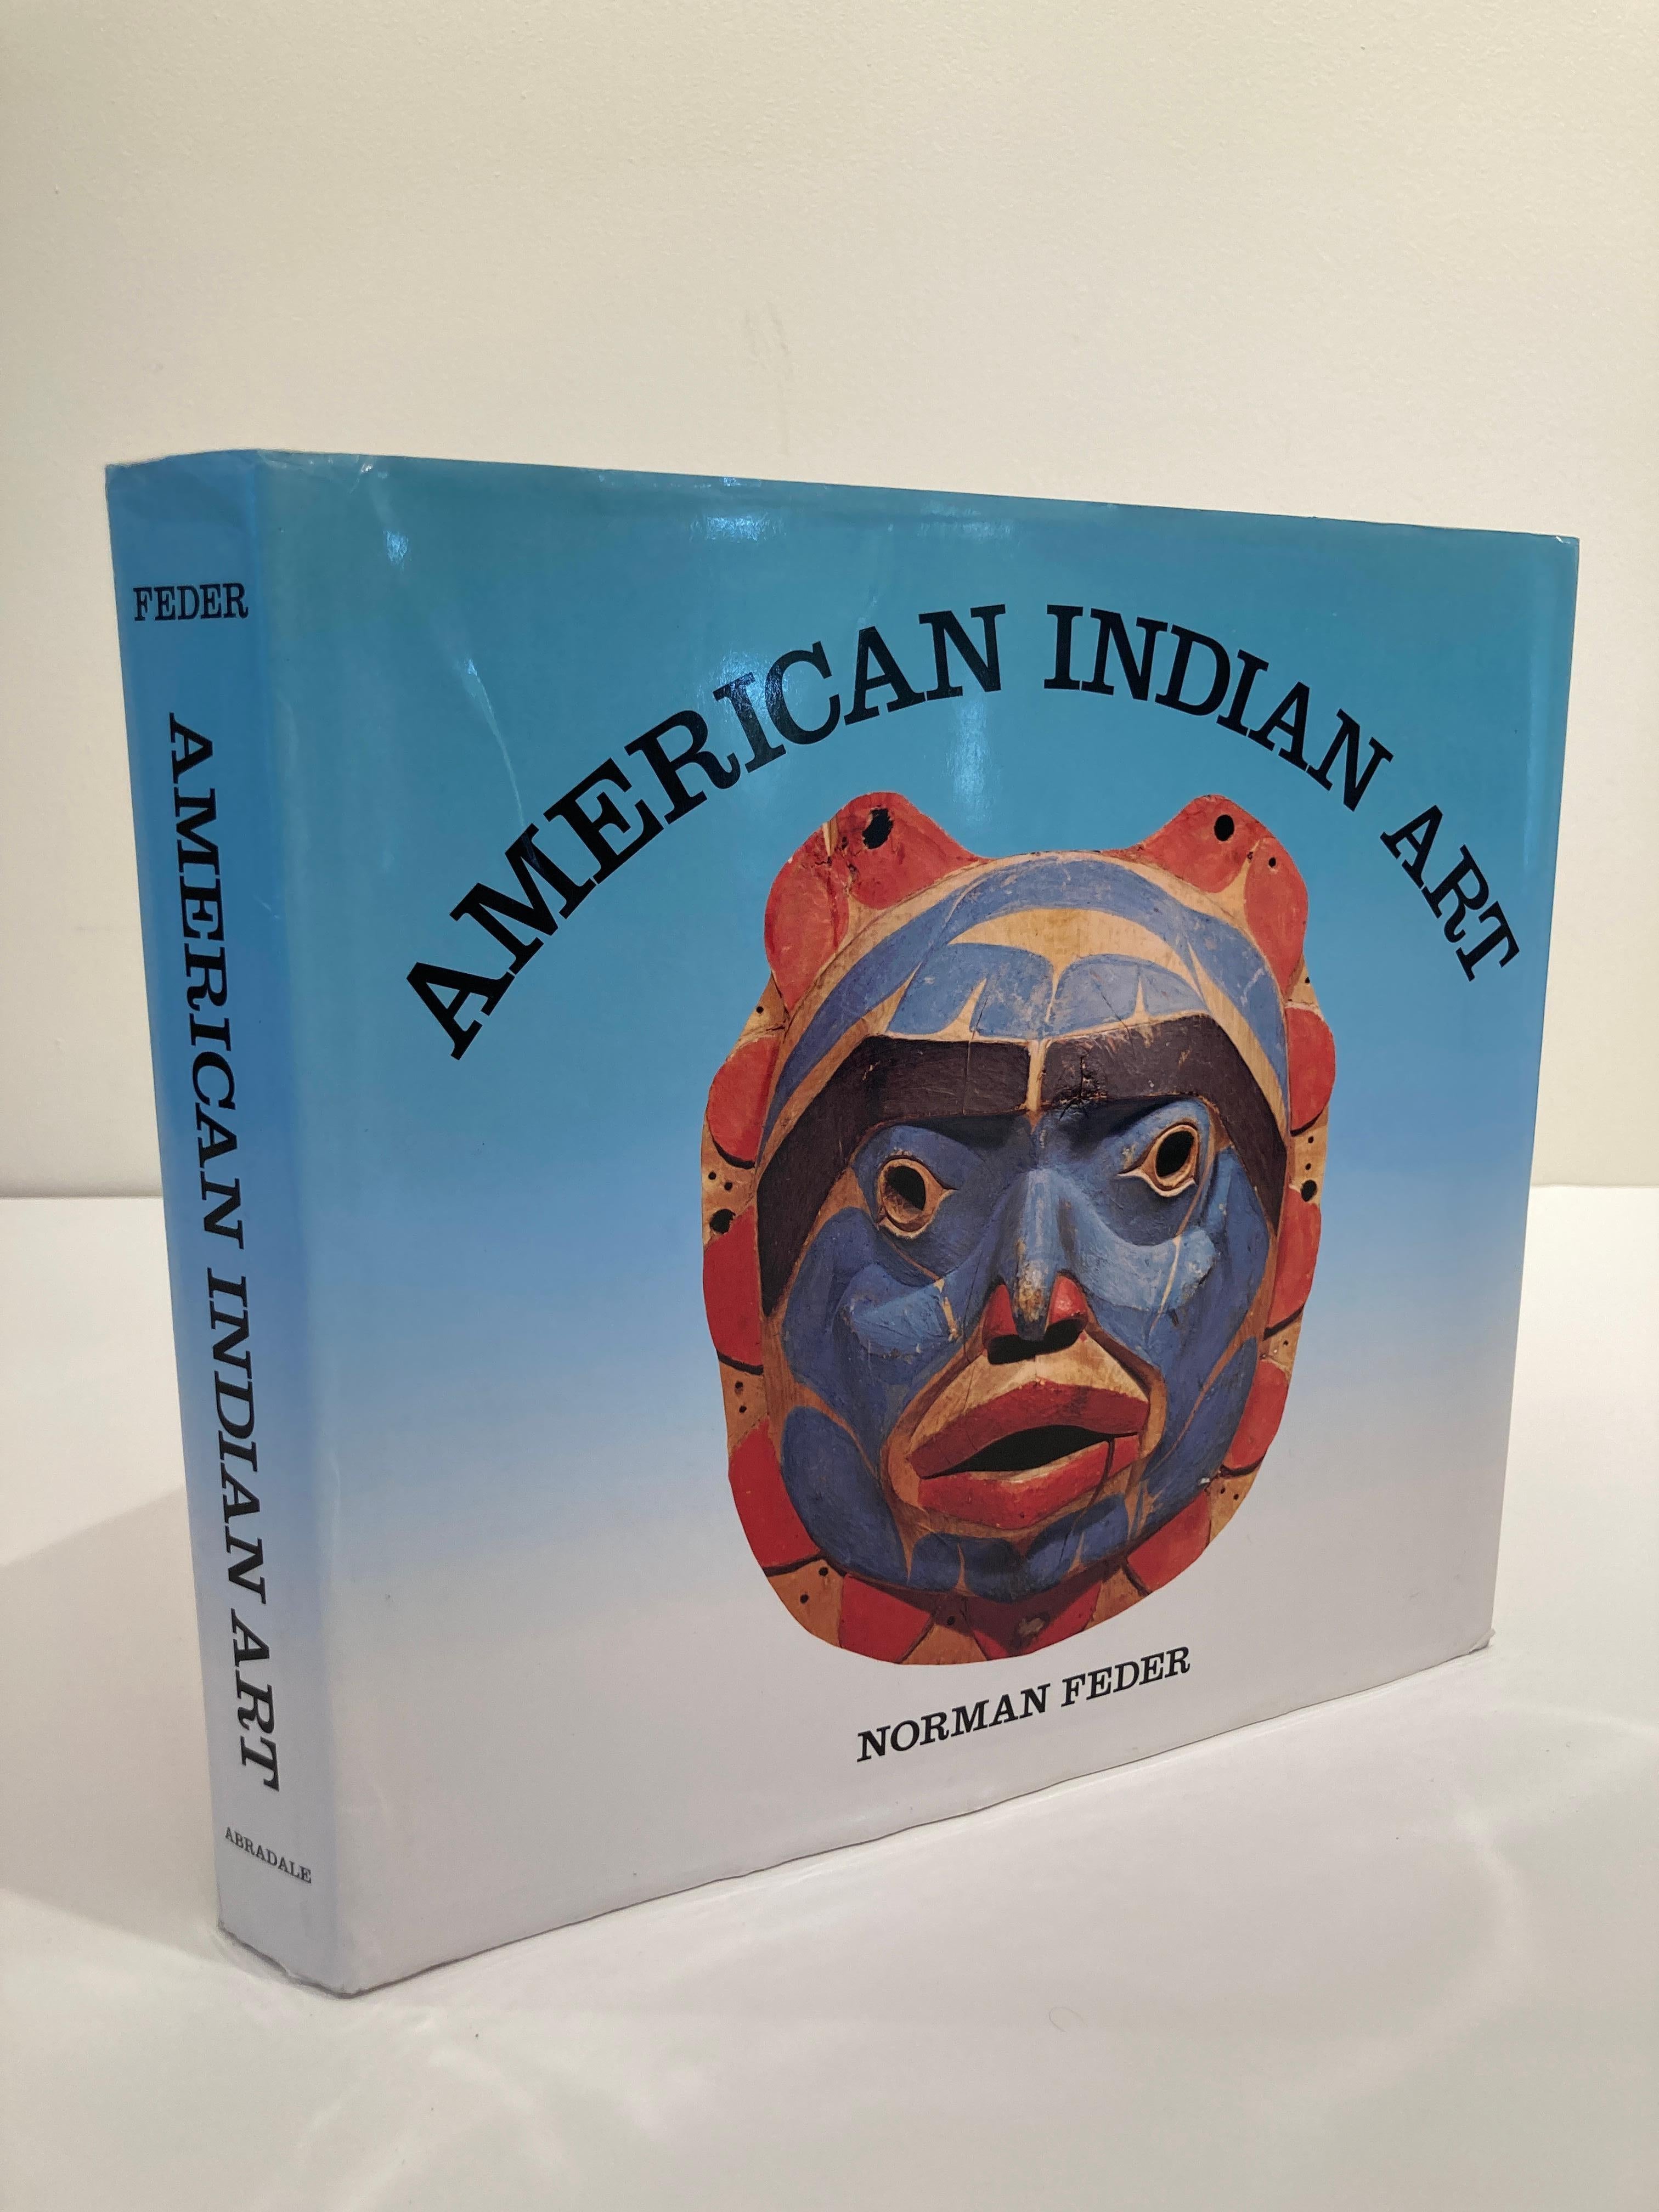 Paper American Indian Art by Norman Feder Hardcover Book